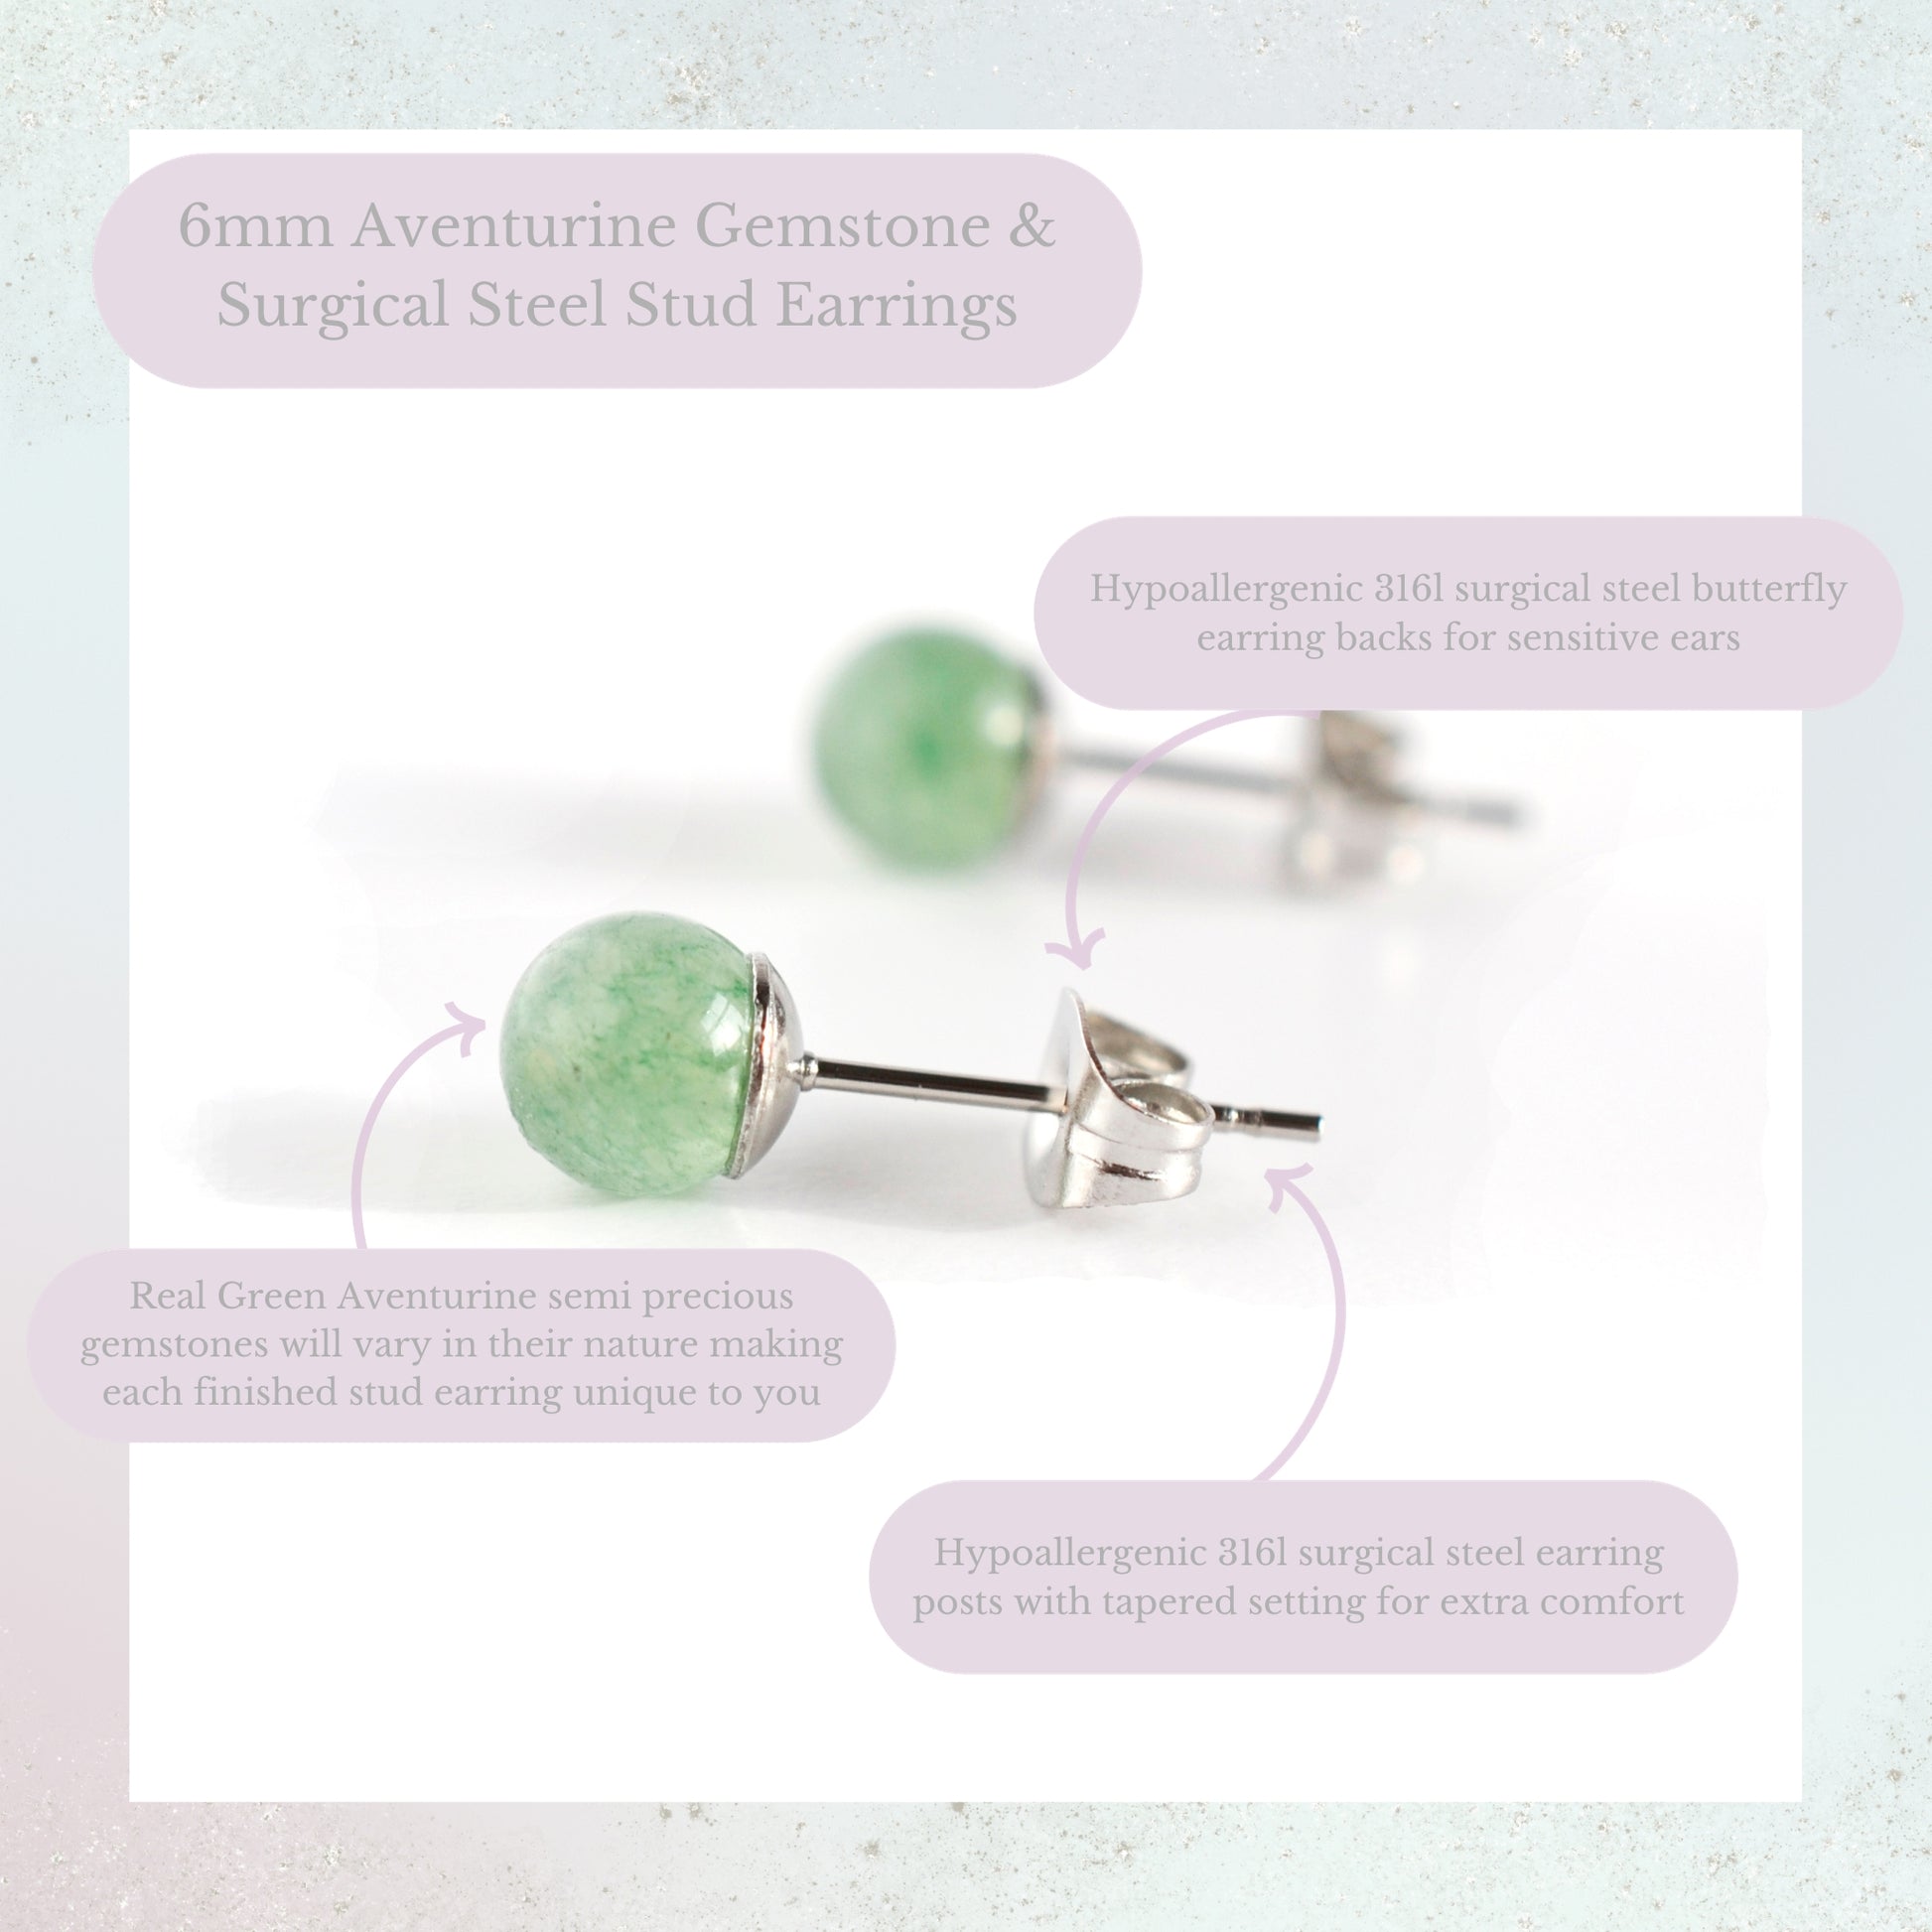 6mm Green Aventurine Gemstone & Surgical Steel Stud Earrings Product Information Graphic